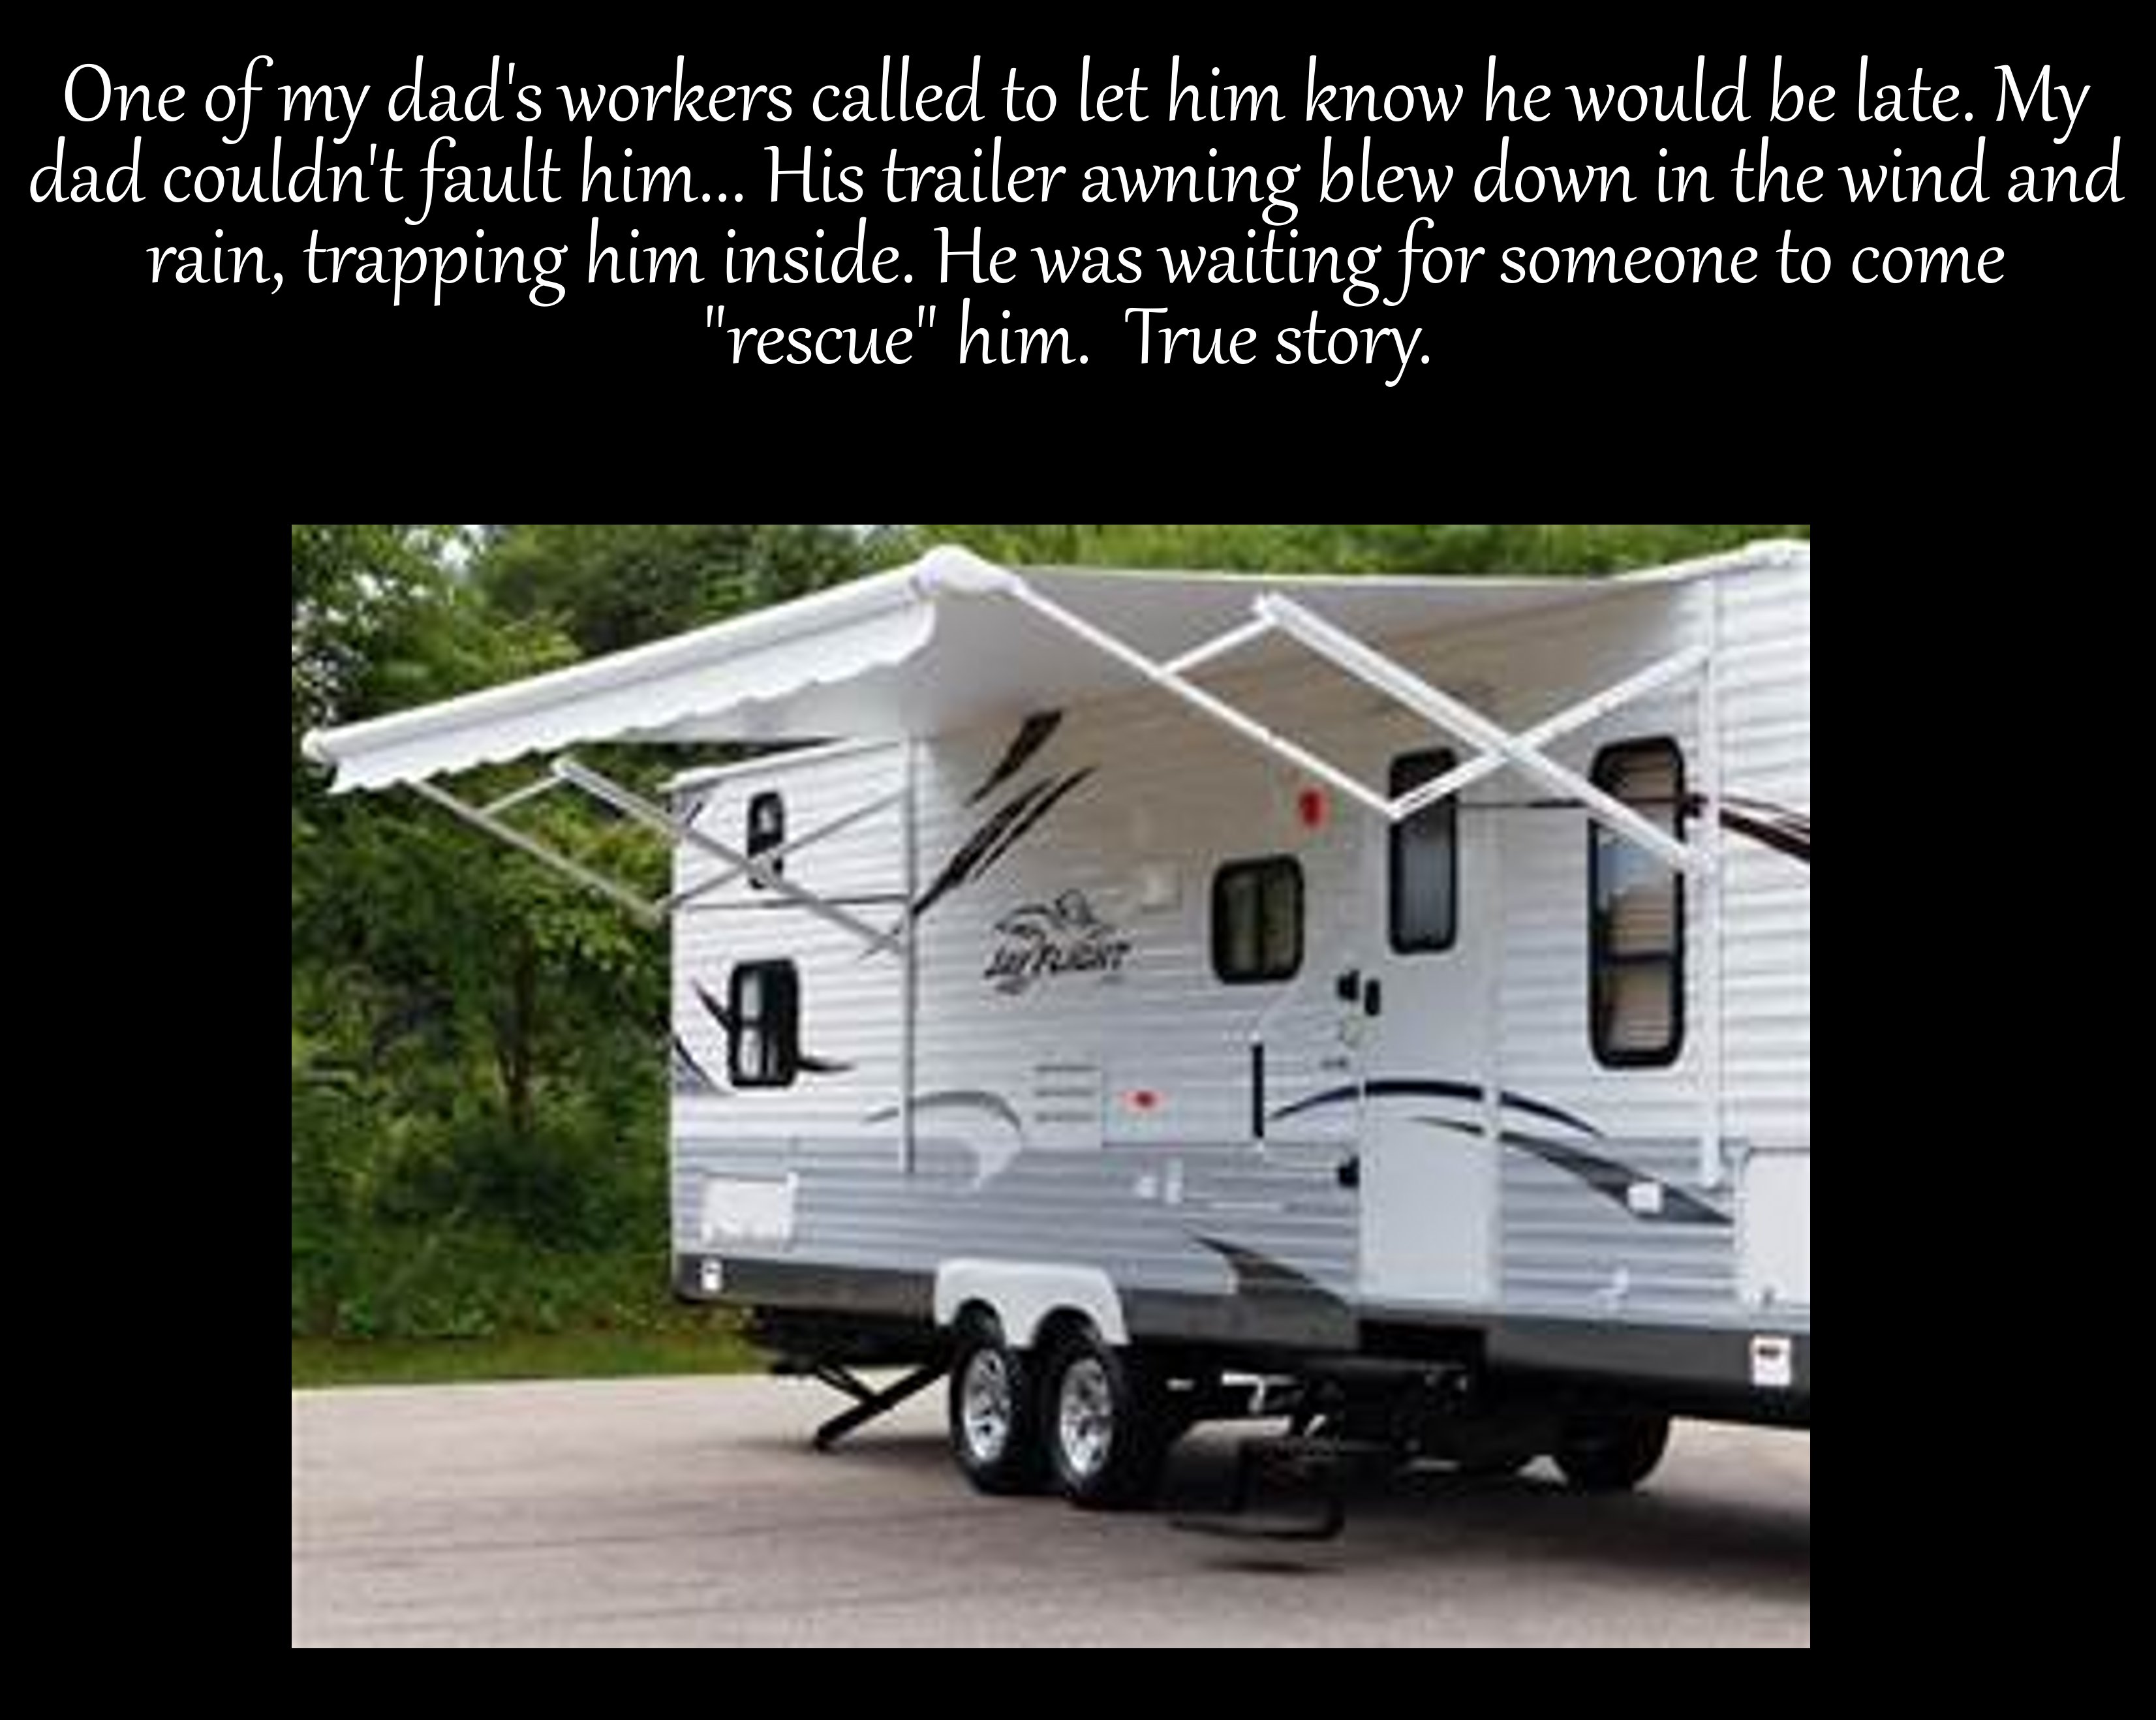 camper awning - One of my dad's workers called to let him know he would be late. My dad couldn't fault him... His trailer awning blew down in the wind and rain, trapping him inside. He was waiting for someone to come "rescue" him. True story. Ort